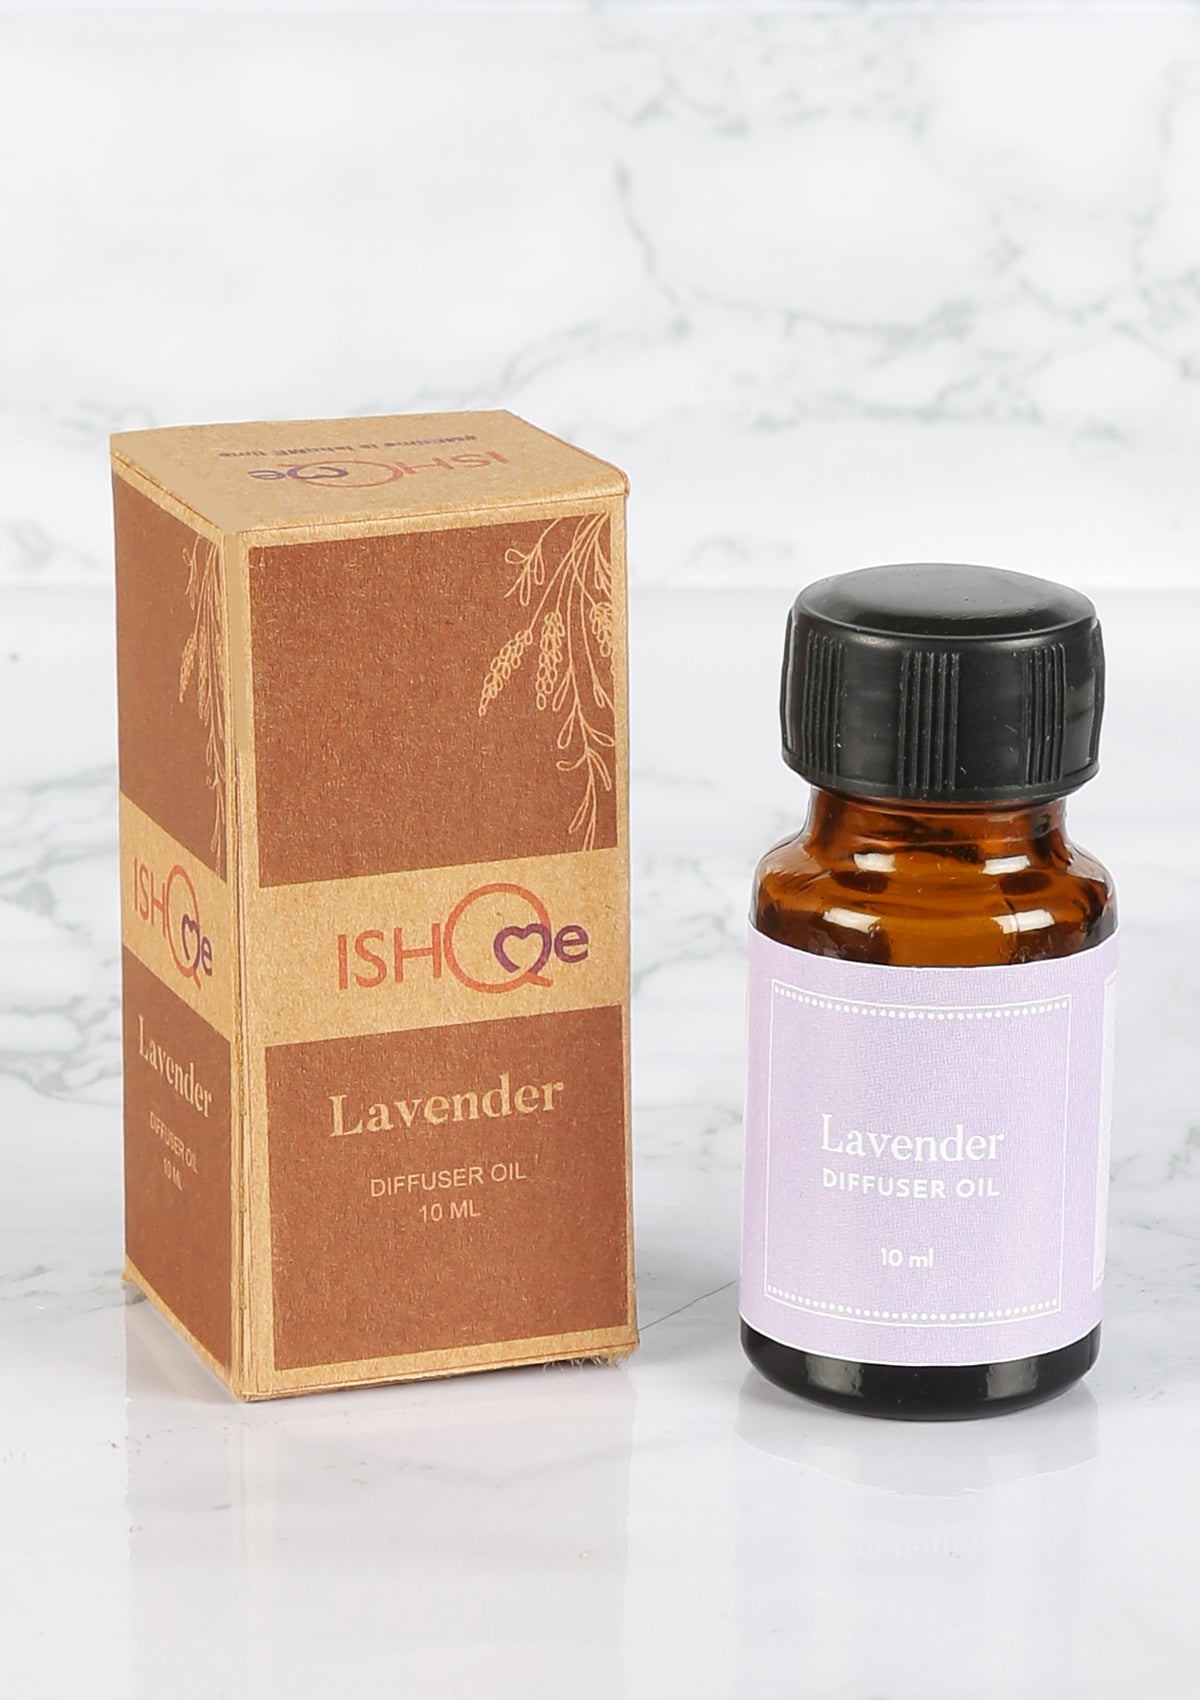 IshqME Calming Aroma Set: Olive Green Ceramic Diffuser & Relaxing Essential Oils - IshqMe